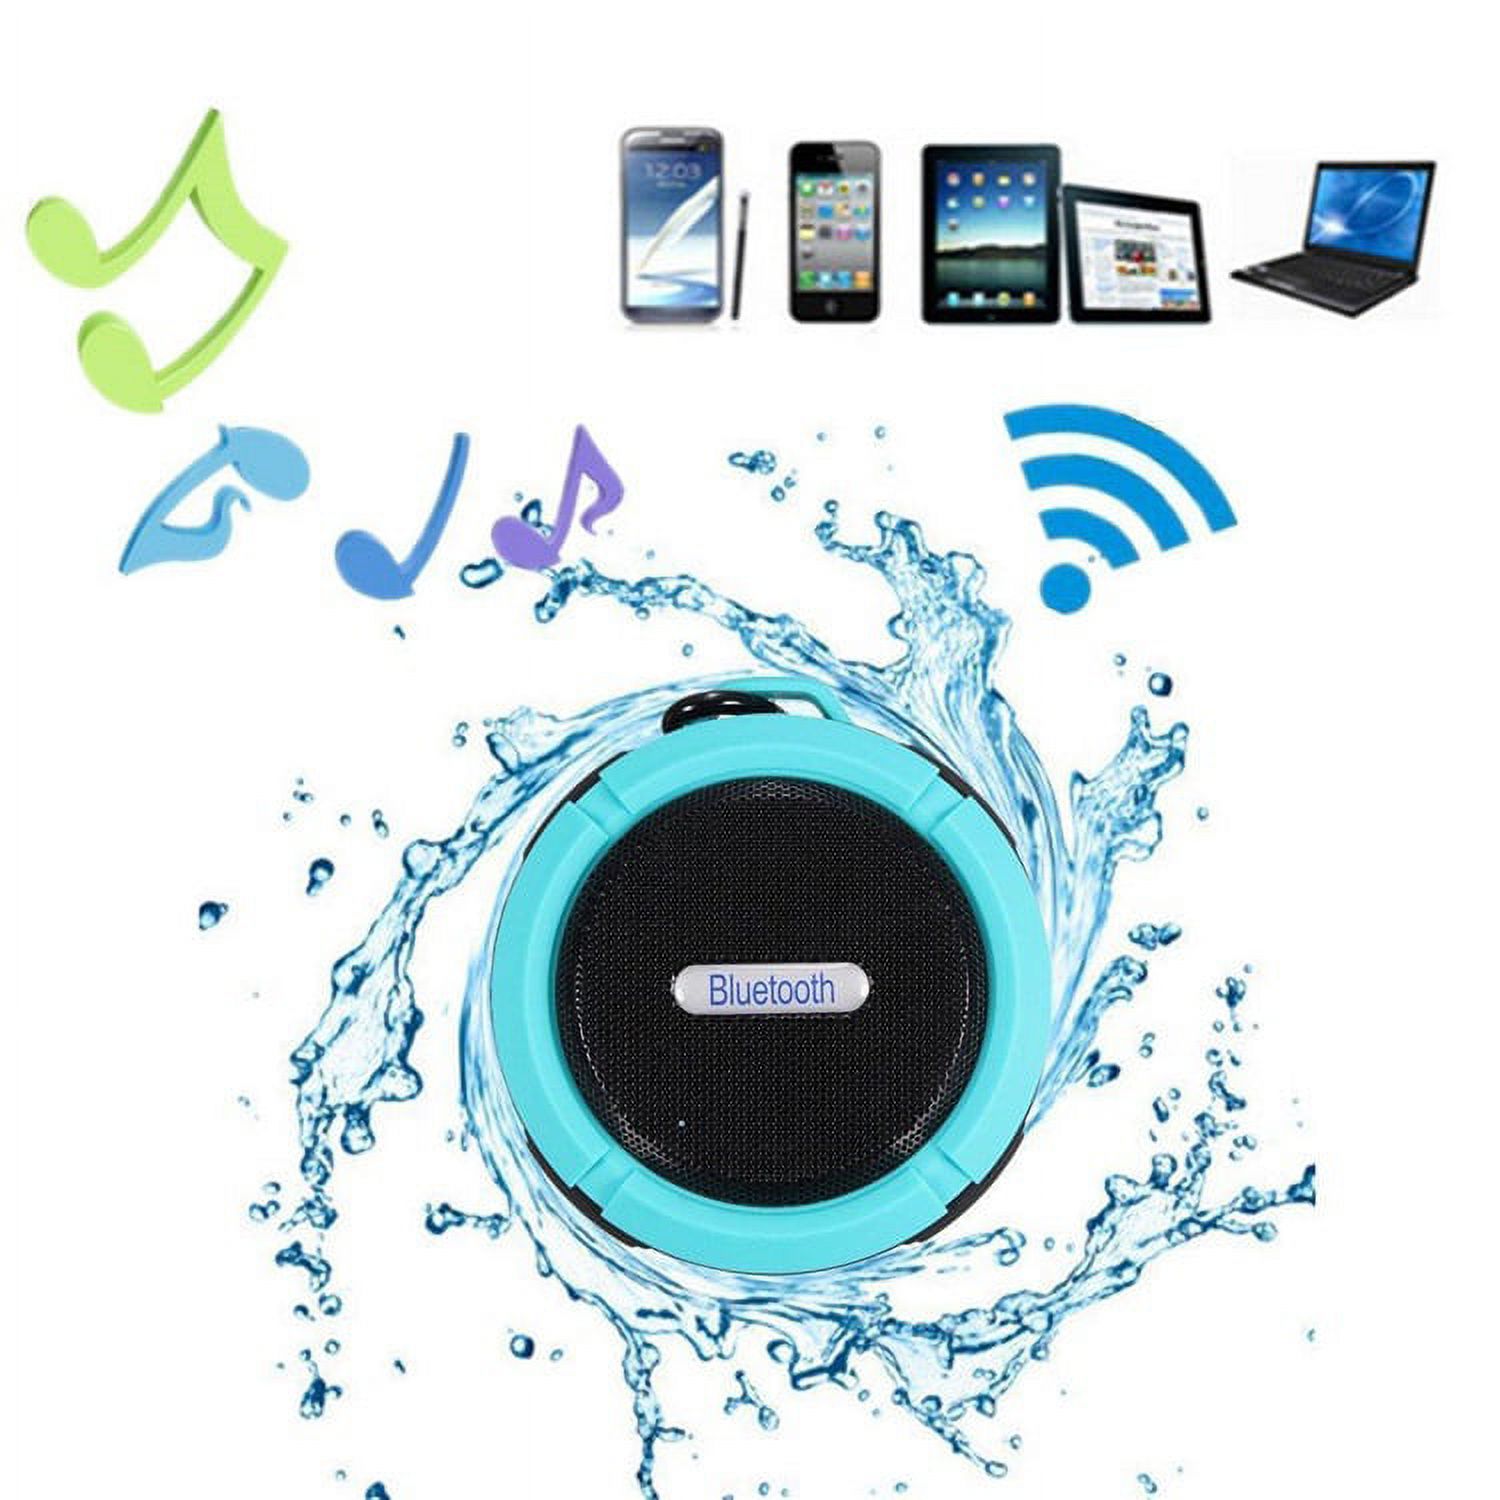 C6 Portable Bluetooth Speaker,Wireless Portable Mini Speaker,Waterproof Bluetooth Speaker,Loud HD Sound,Shower Speaker with Suction Cup & Sturdy Hook,Compatible with IOS,Android,PC,Pad - image 3 of 9